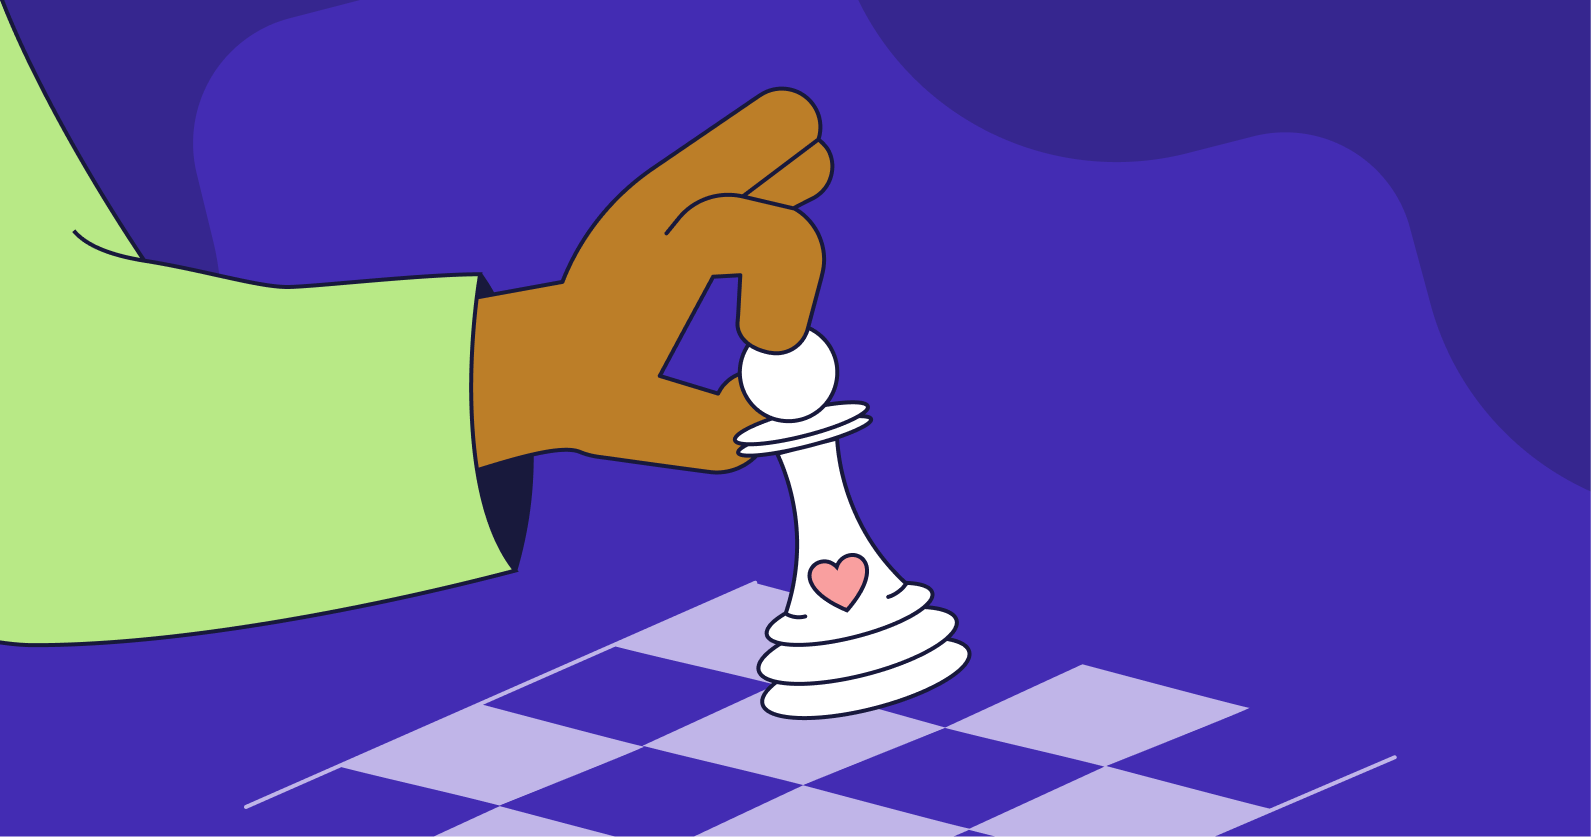 Illustration of a person moving a chess piece.